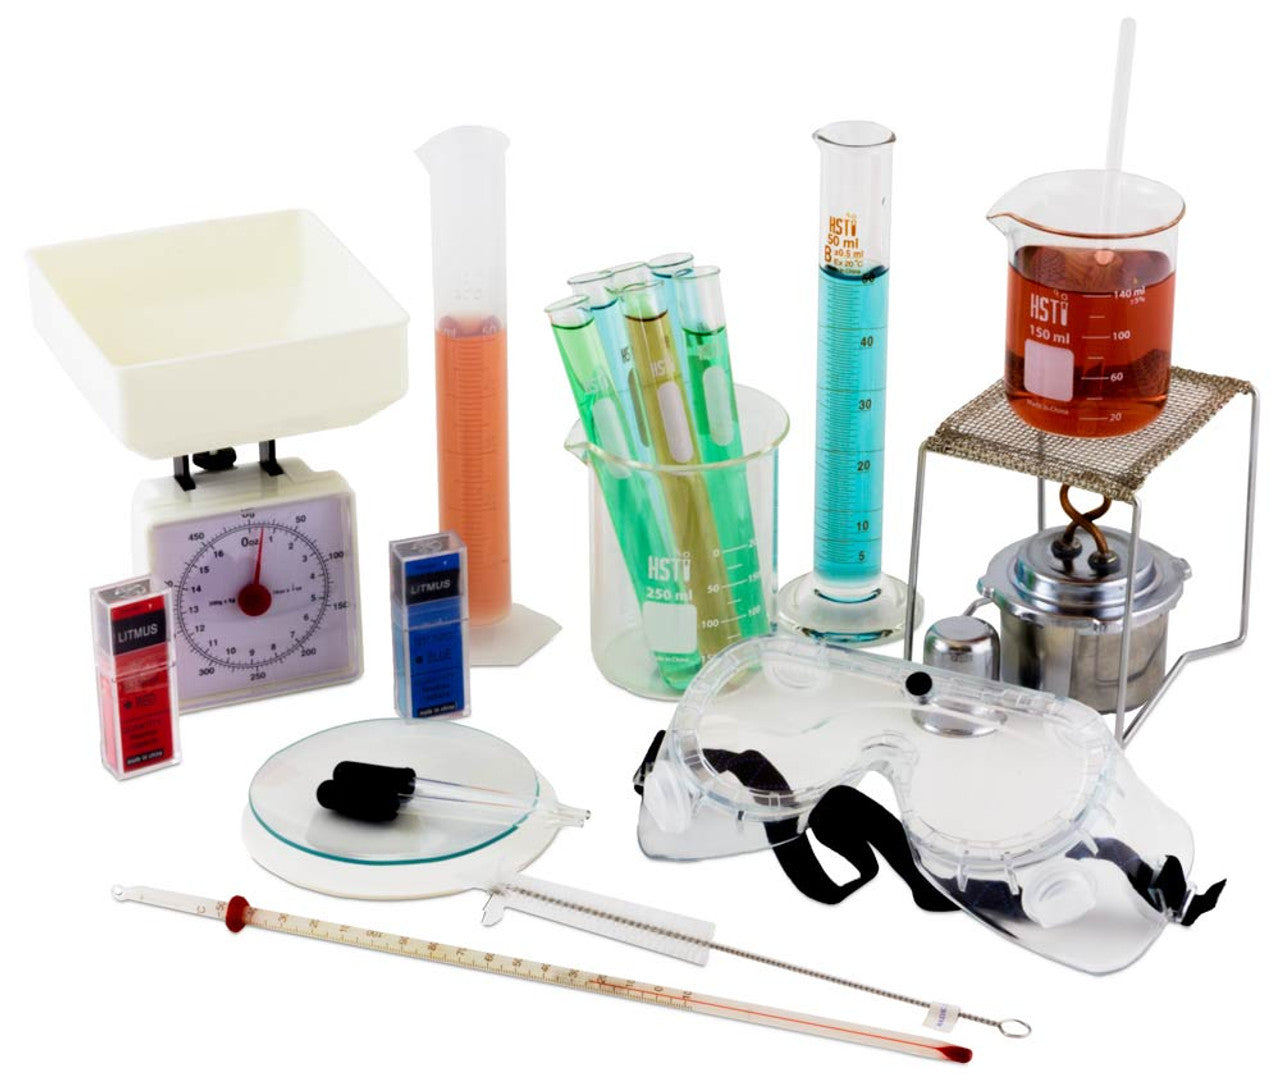 Exploring Creation With Chemistry Lab Kit (H616)